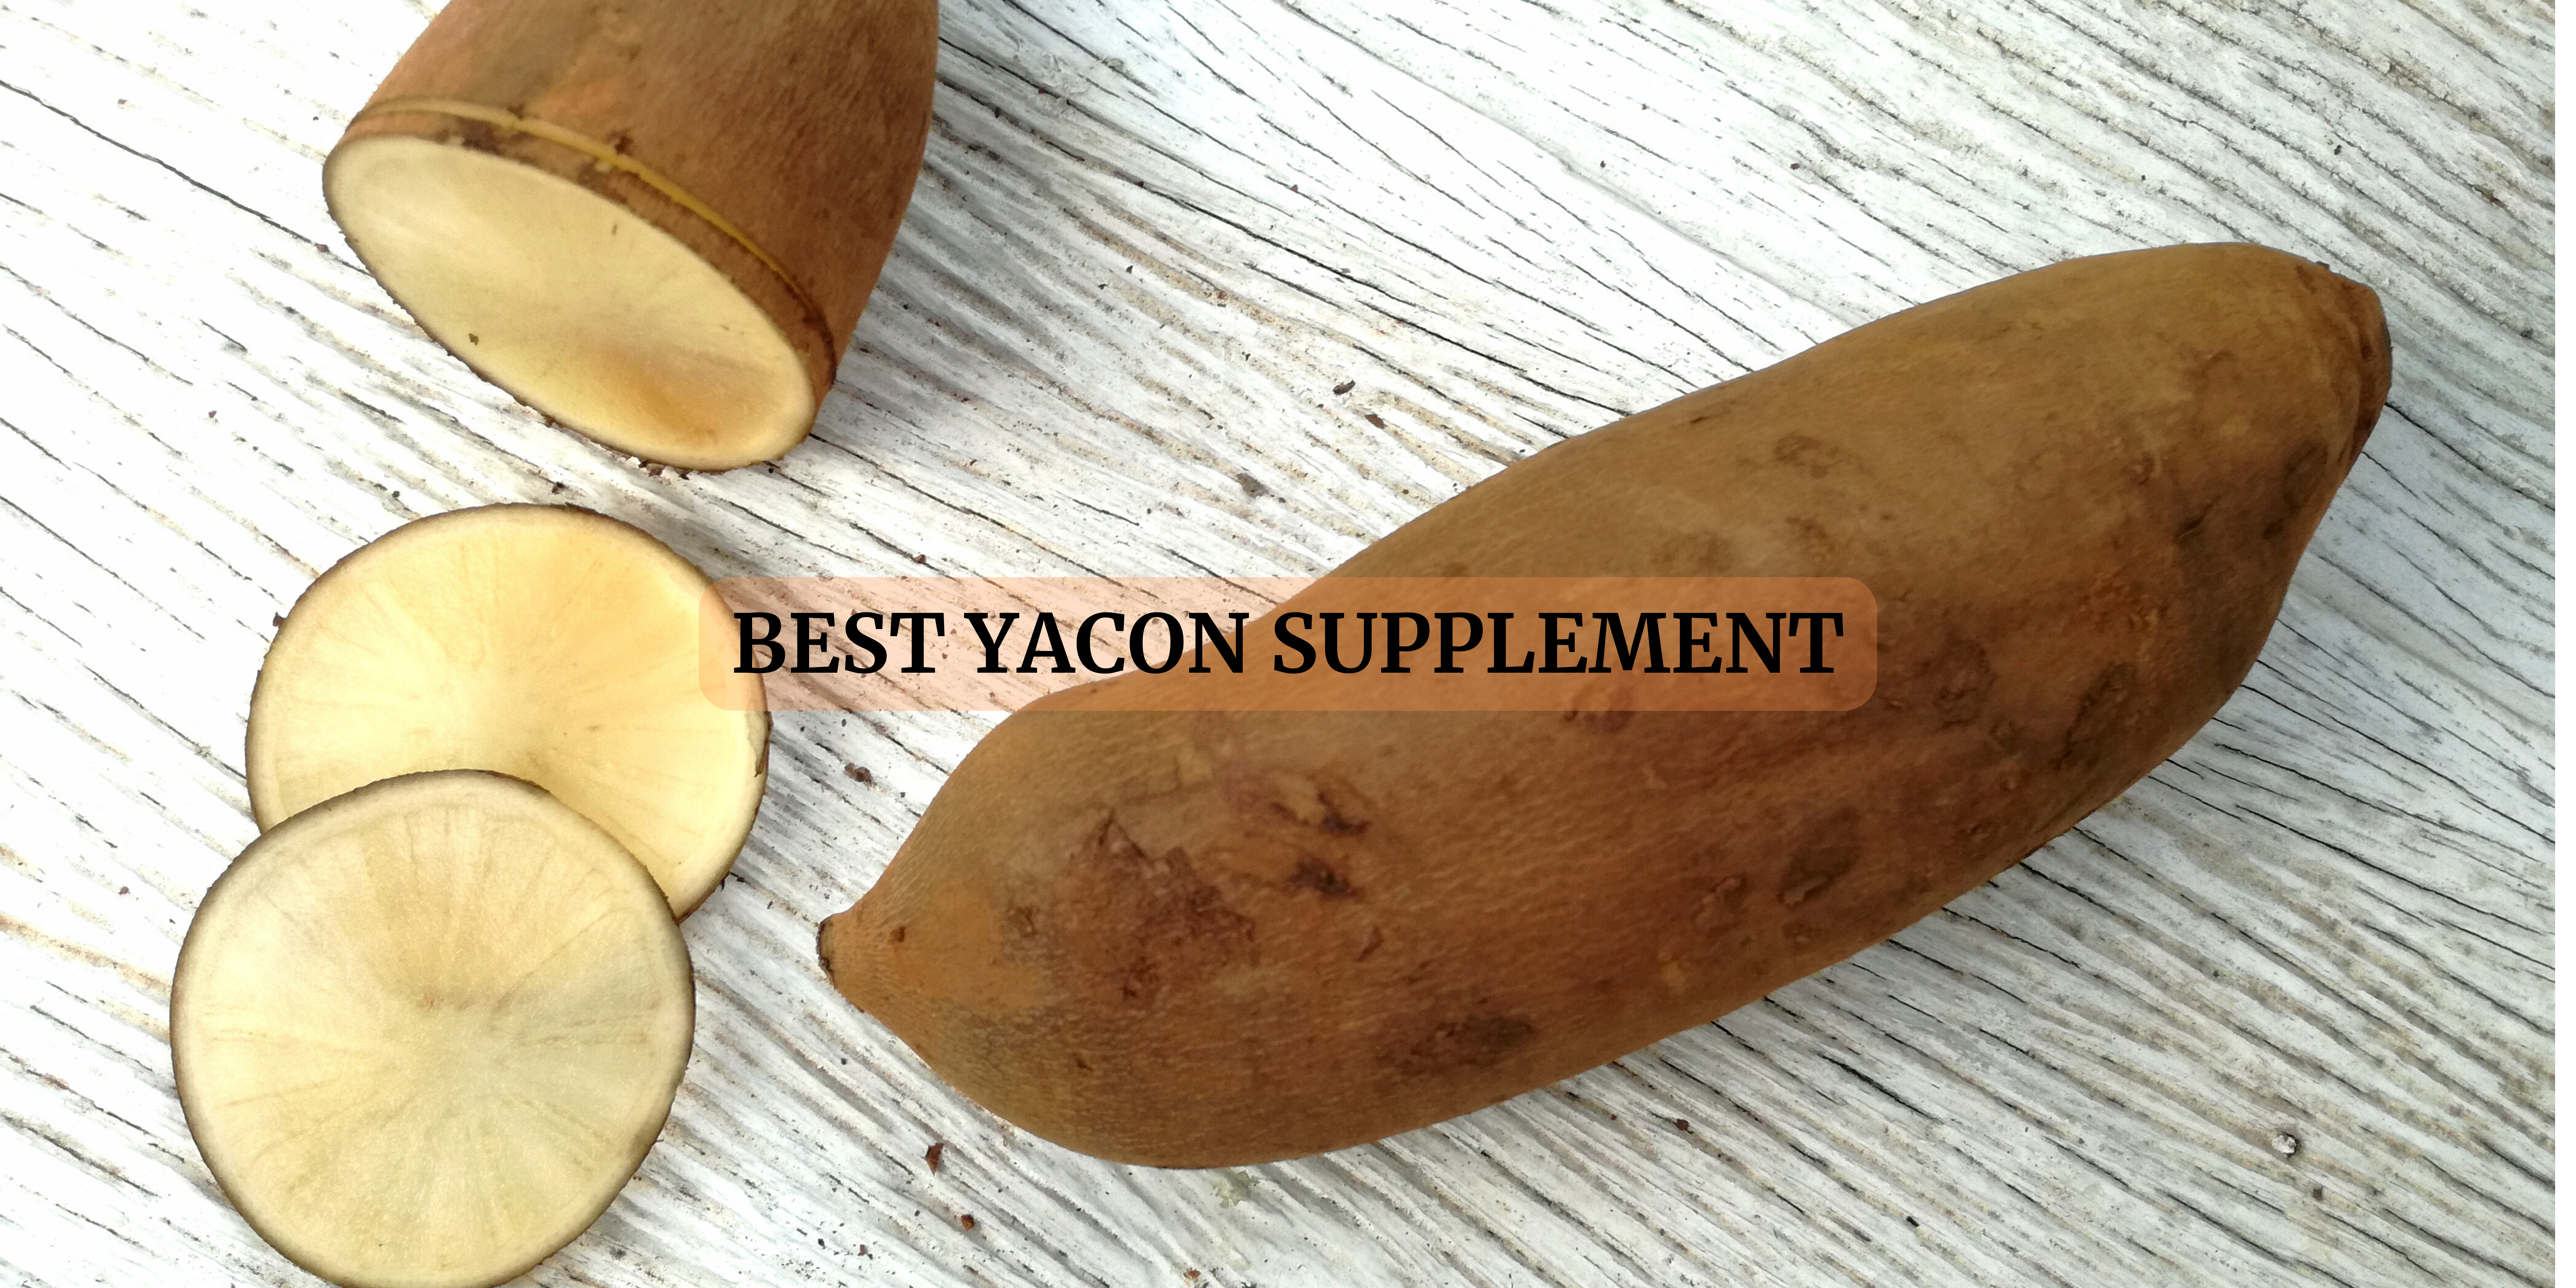 Yacon Supplements in Italy